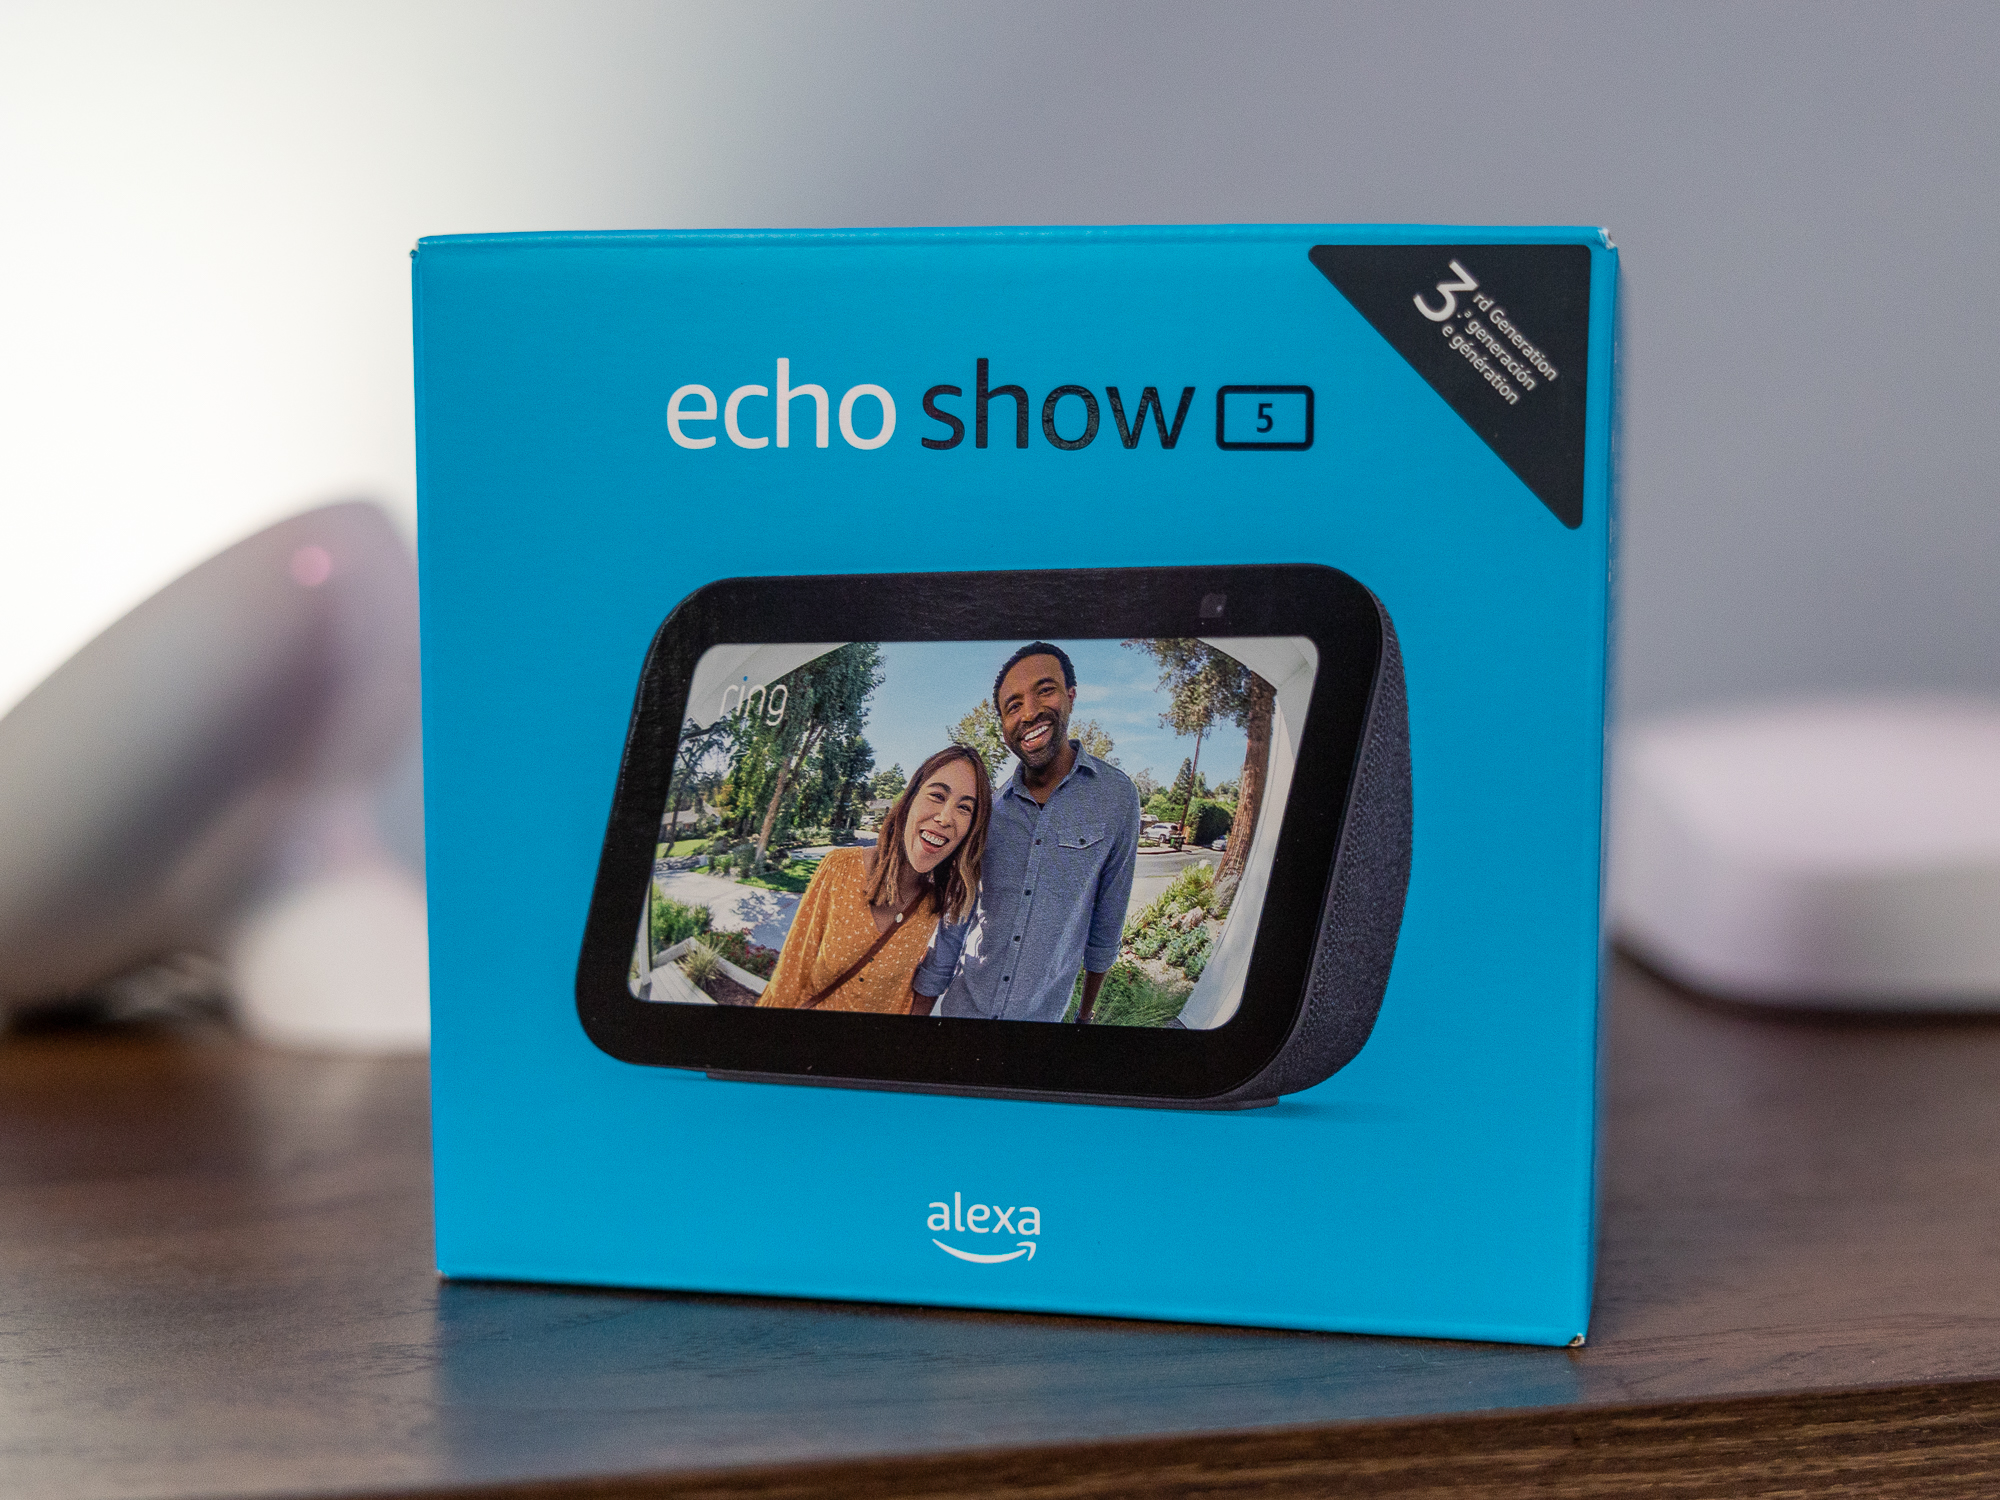 Echo Show 5 Smart Speaker Review - Consumer Reports